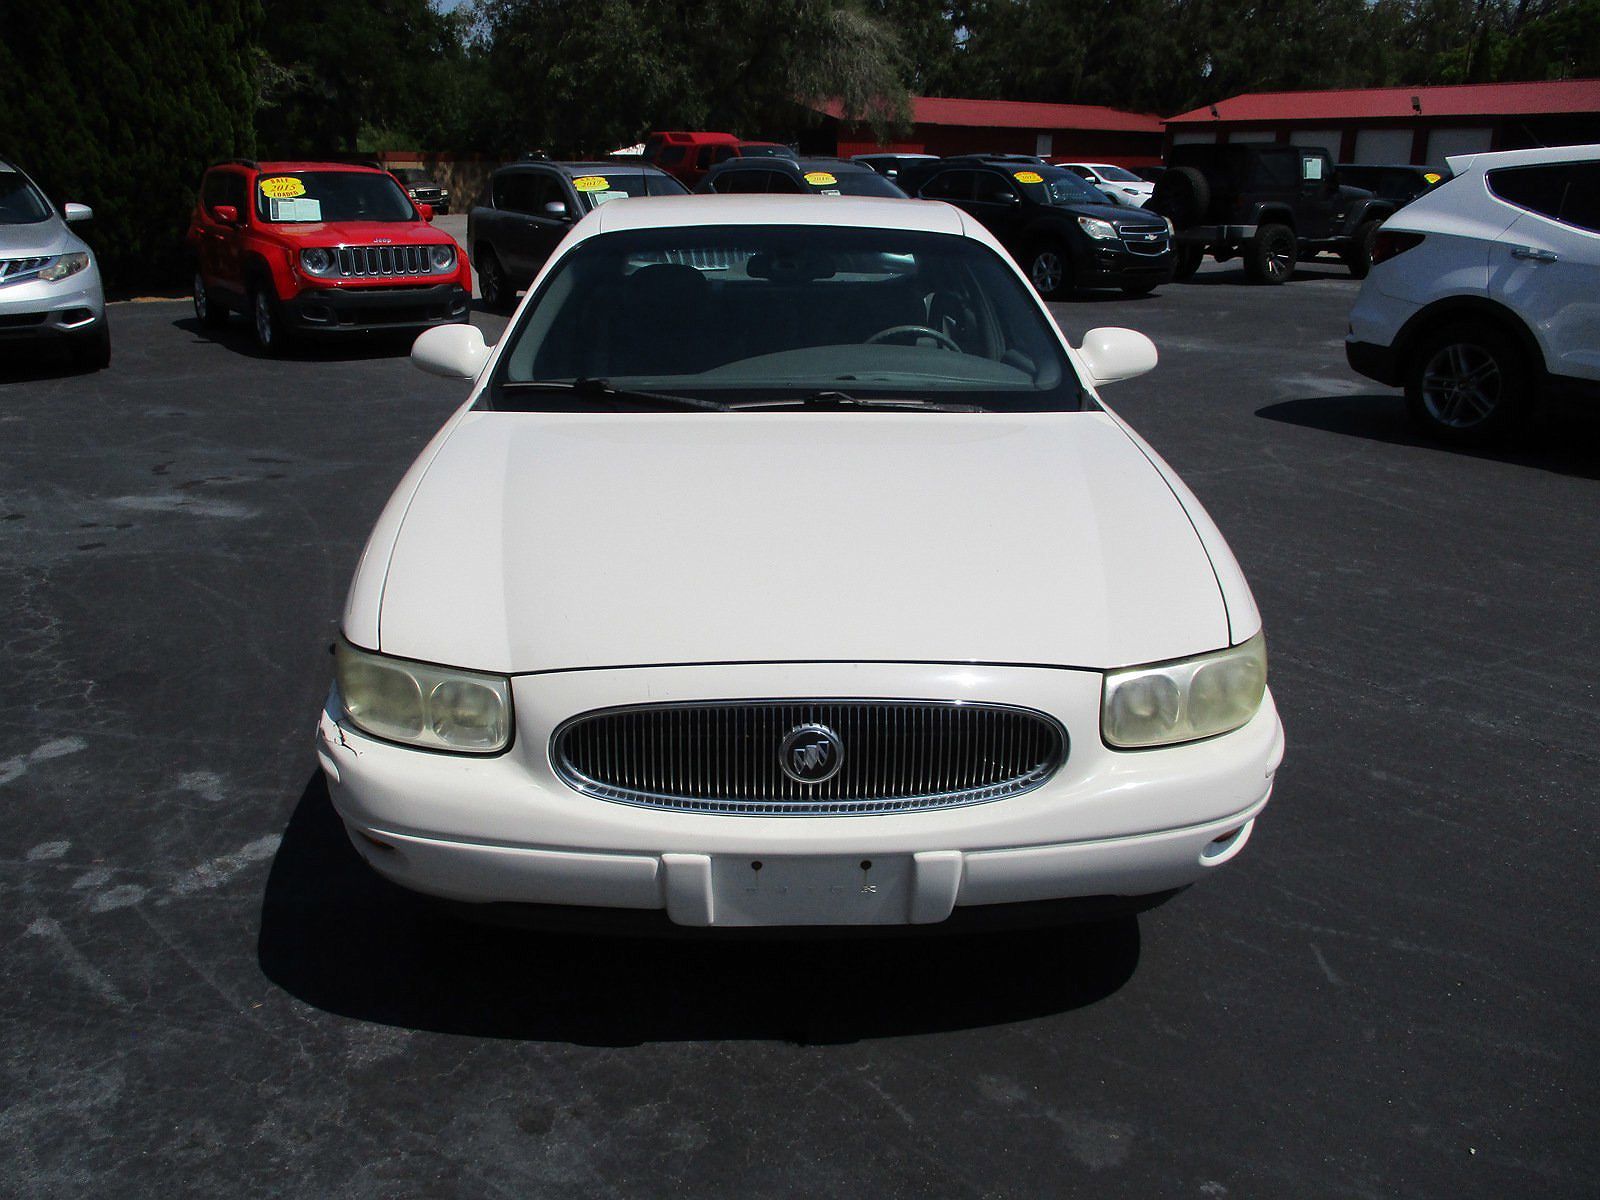 2002 Buick LeSabre Limited Edition image 7